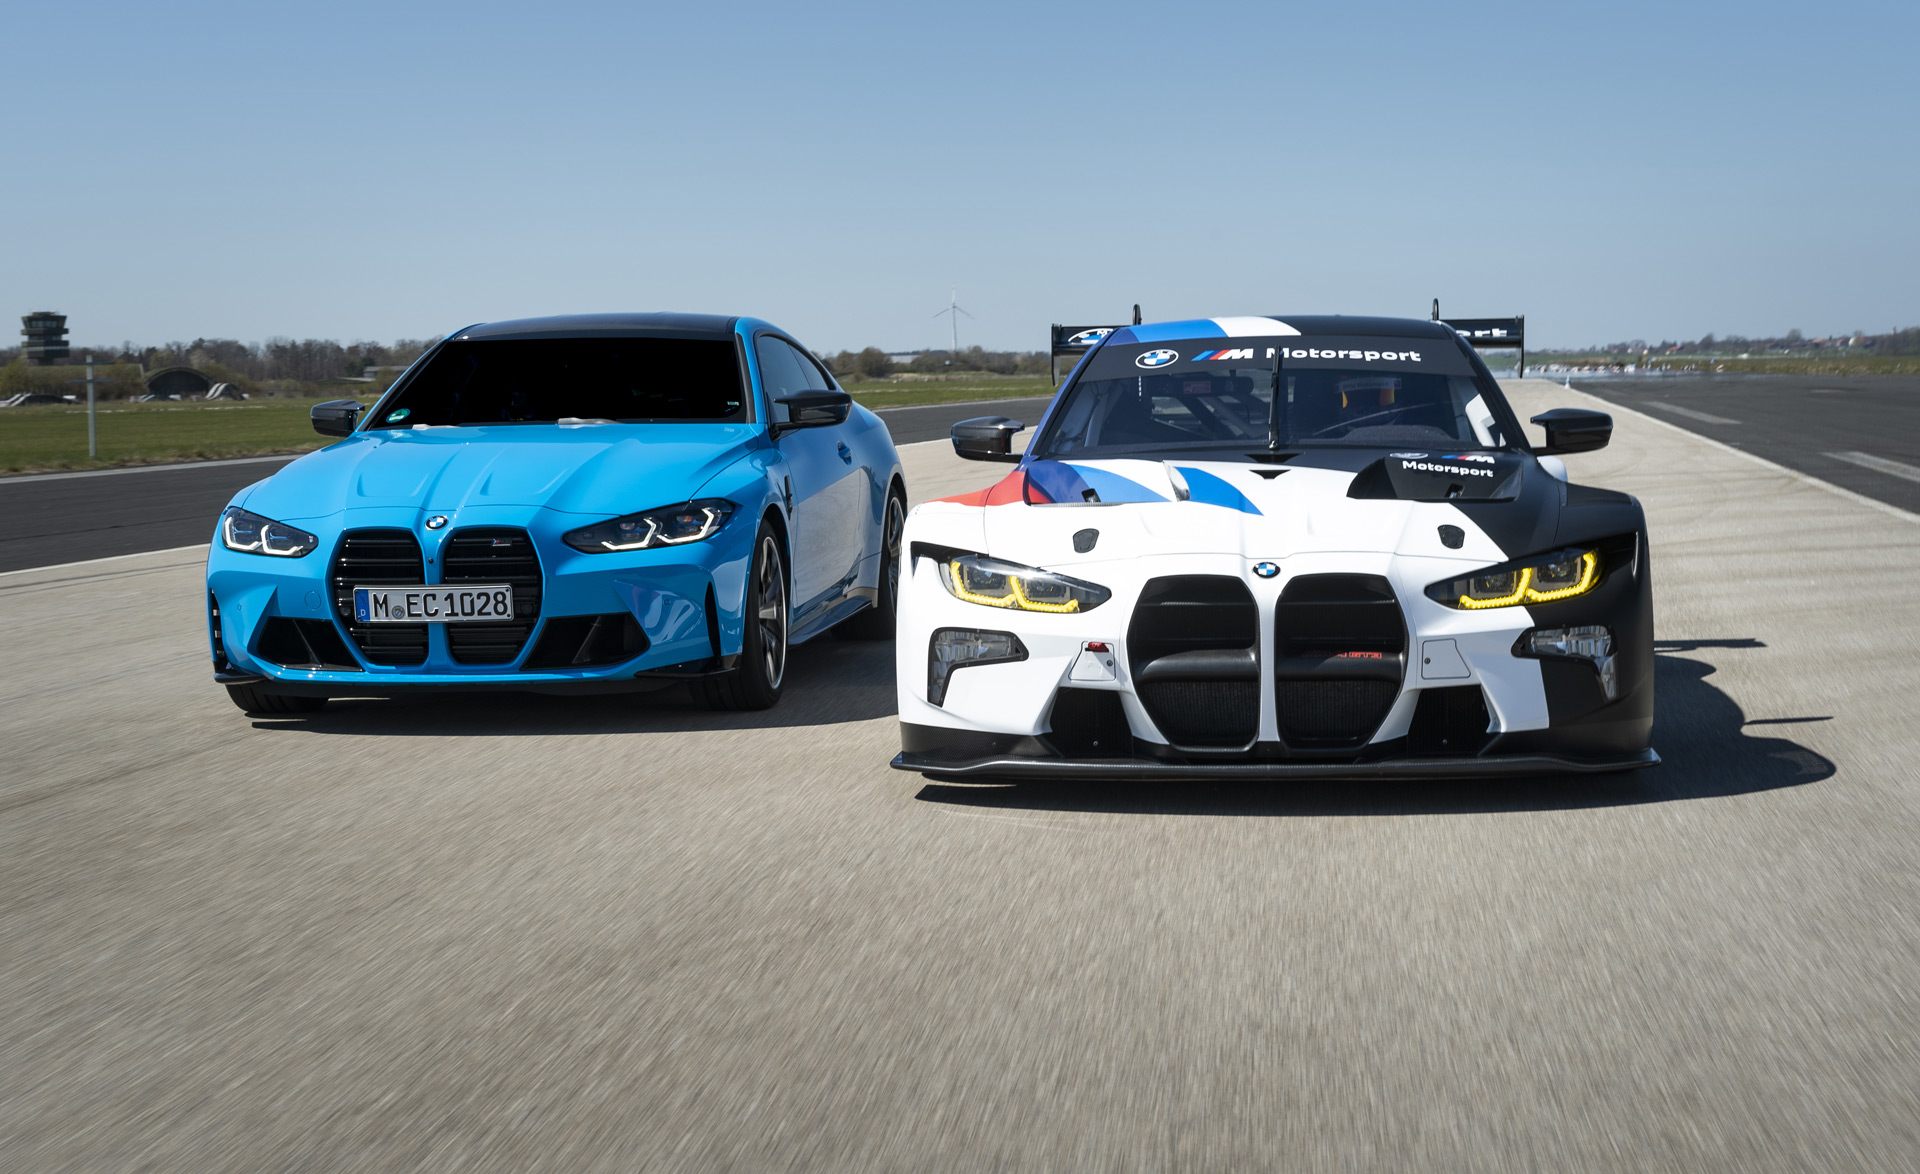 2022 BMW M4 GT3 customer race car ready to hit the track